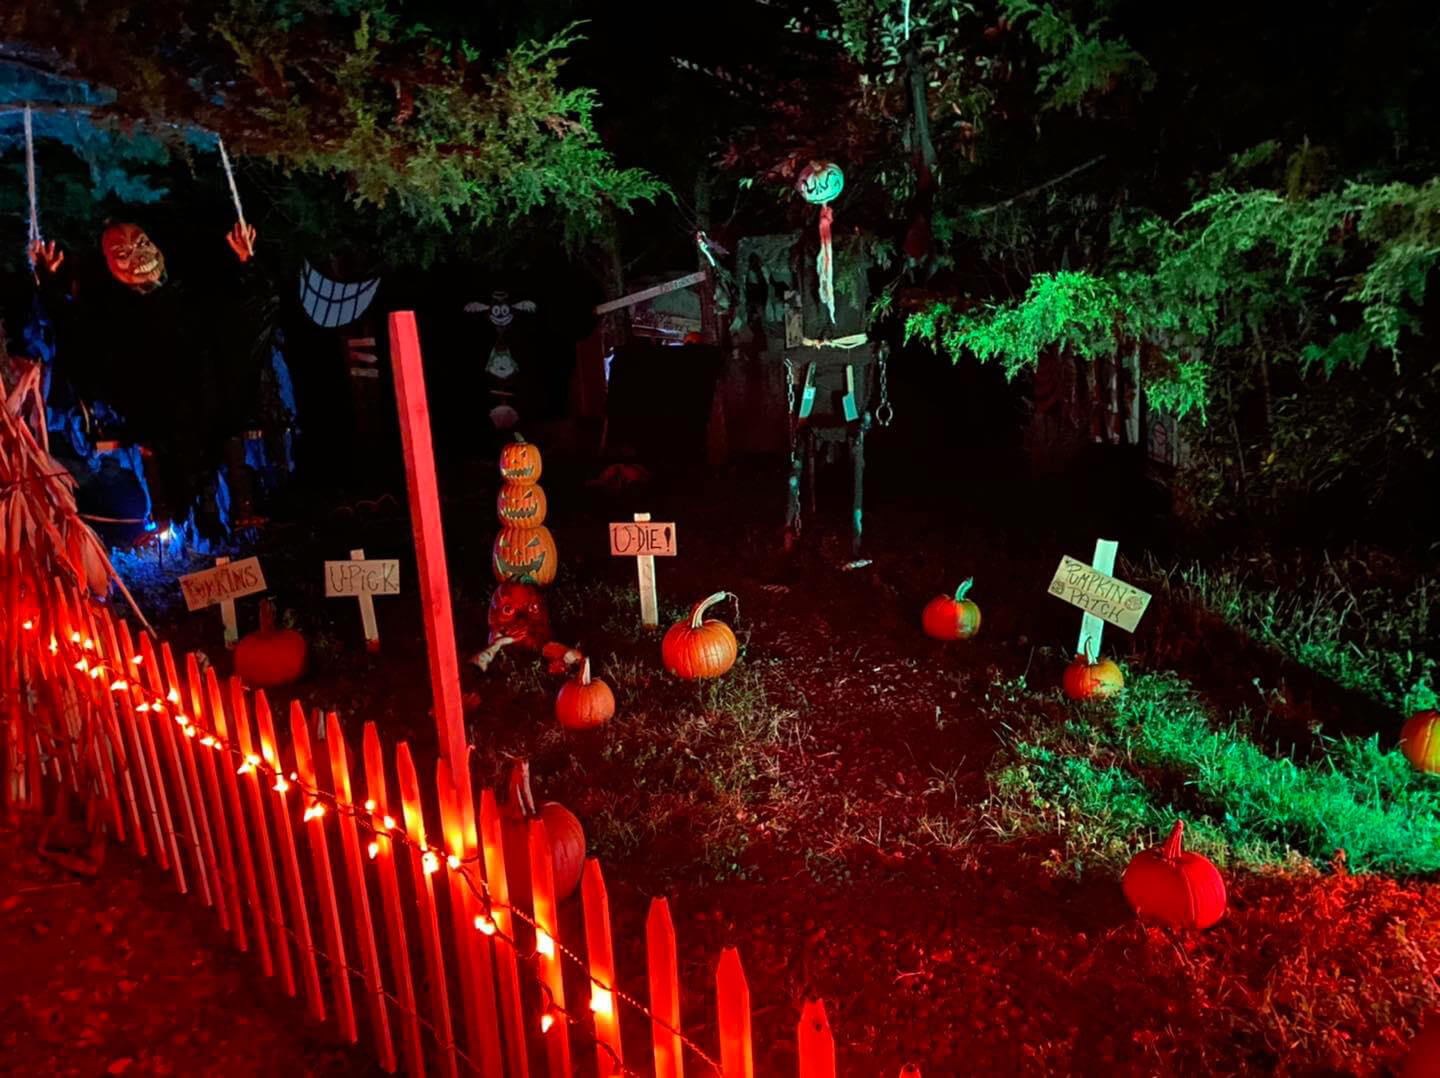 A pumpkin patch at night with orange Halloween lights and scary decorations